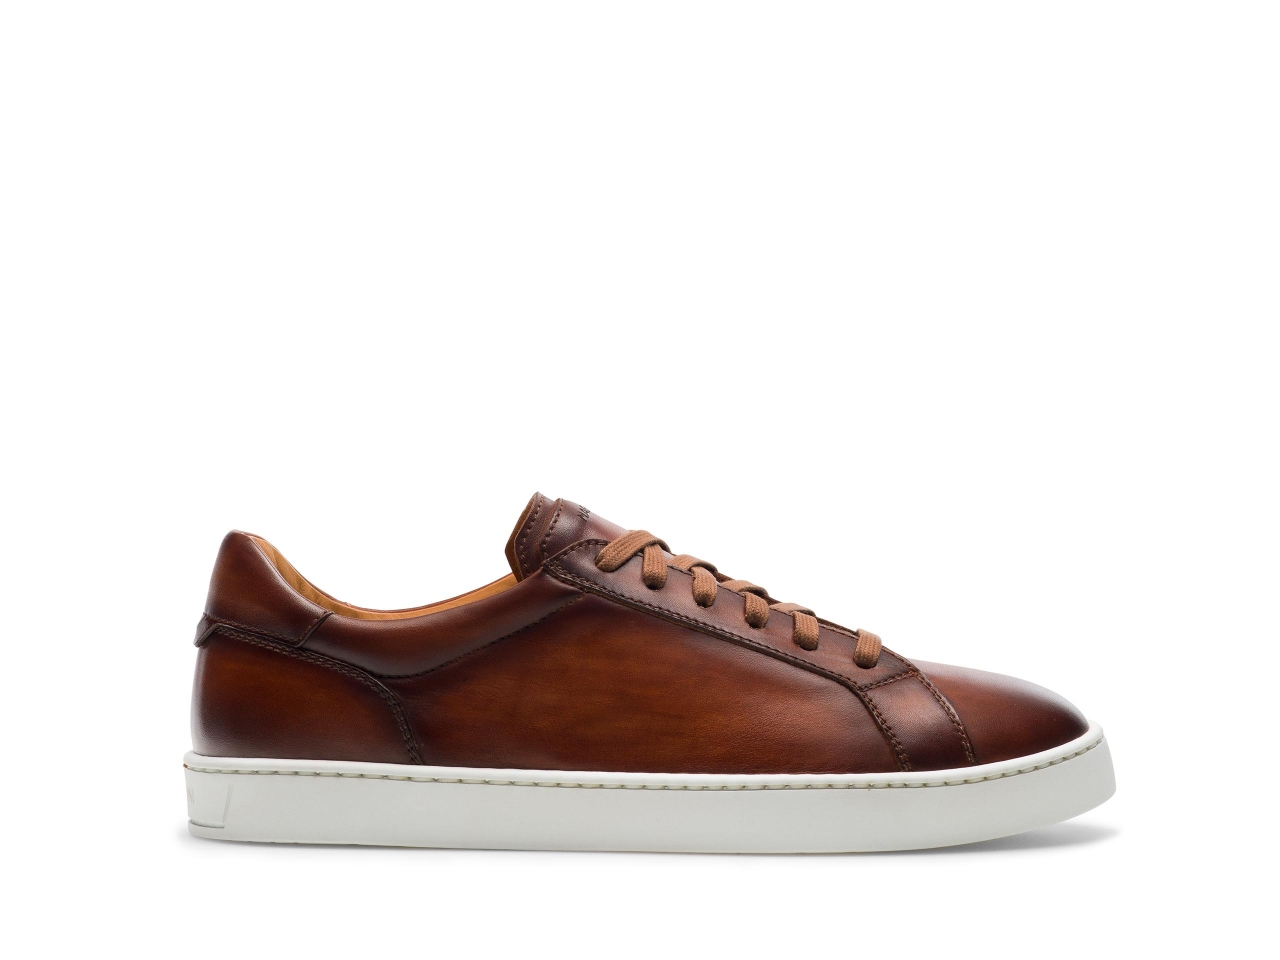 Discounted Sneaker Style: Magnanni Low Top Sneakers Discount